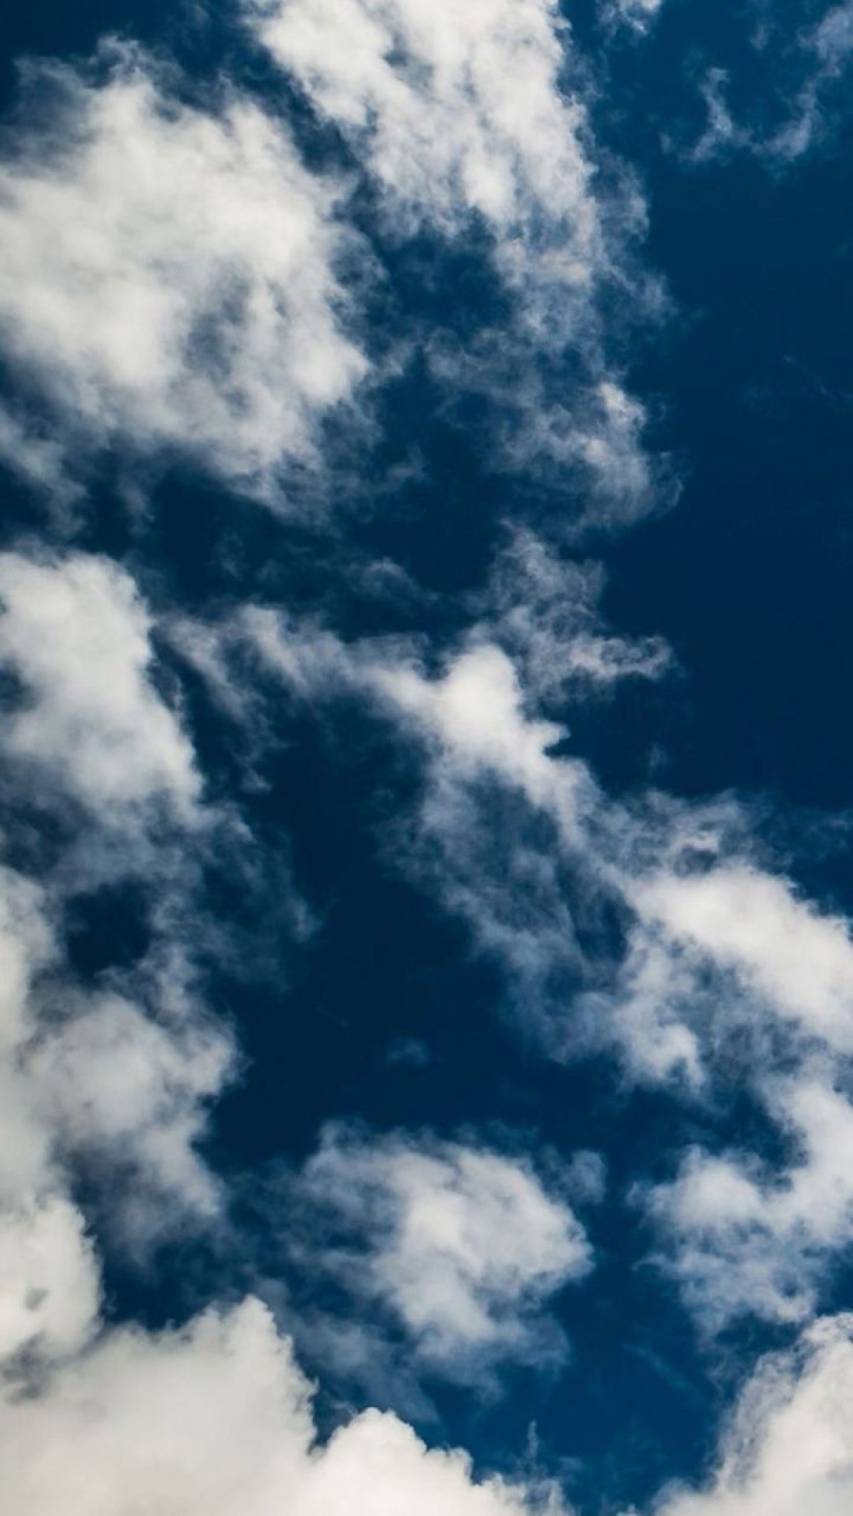 Aesthetic Sky and Clouds iPhone Background image